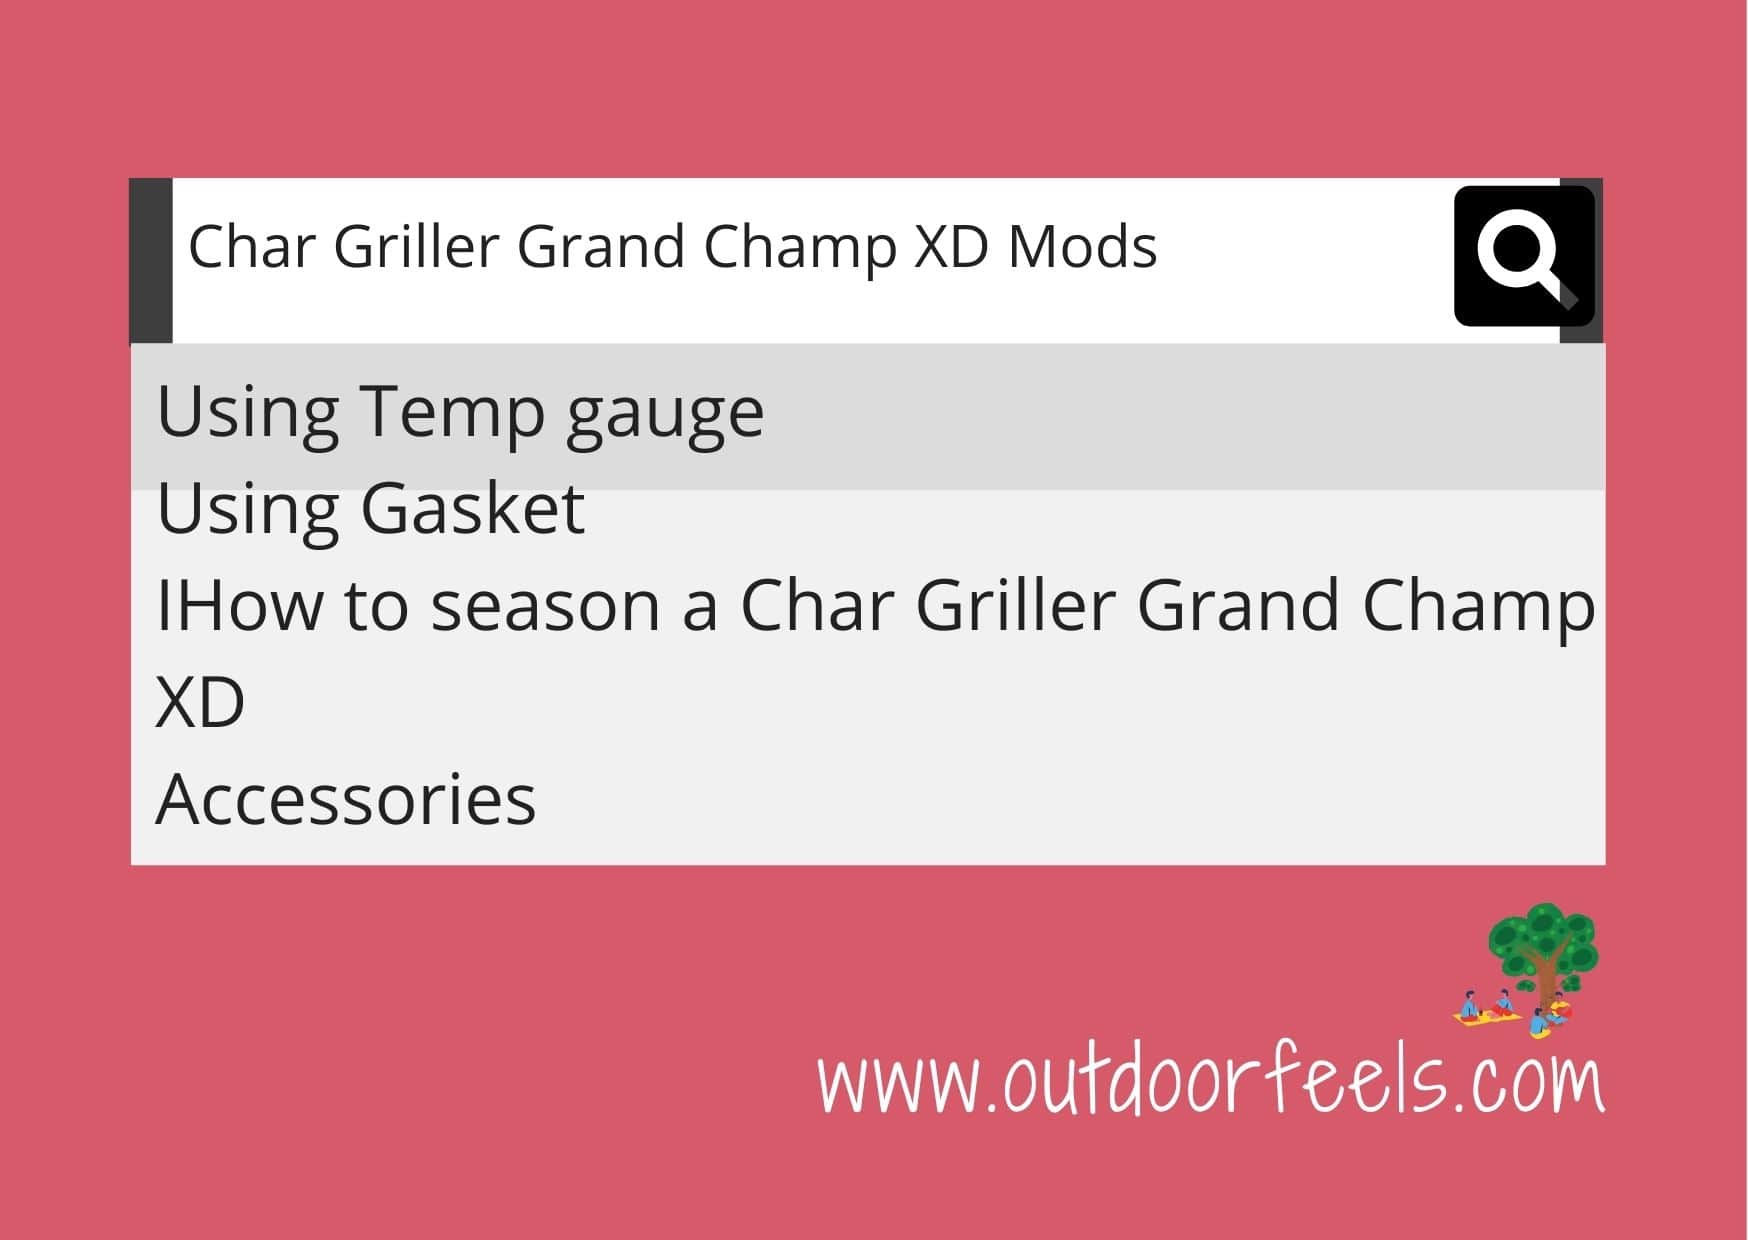 Char Griller Grand Champ XD Mods_Featured Image-min